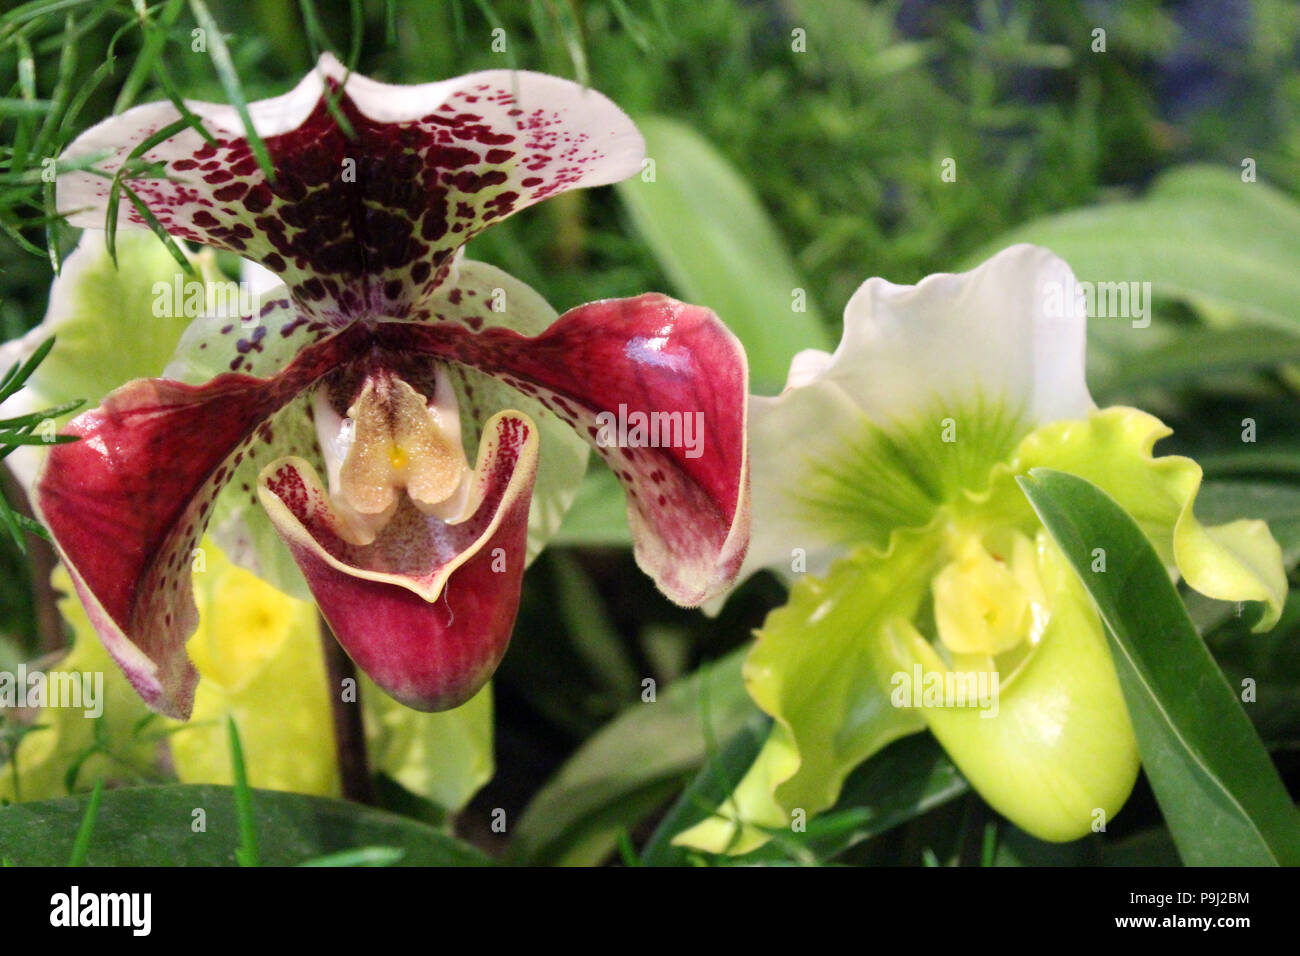 Close up of a maroon and white Lady's Slipper Orchid and a green, yellow and white Lady's Slipper Orchid in full bloom Stock Photo